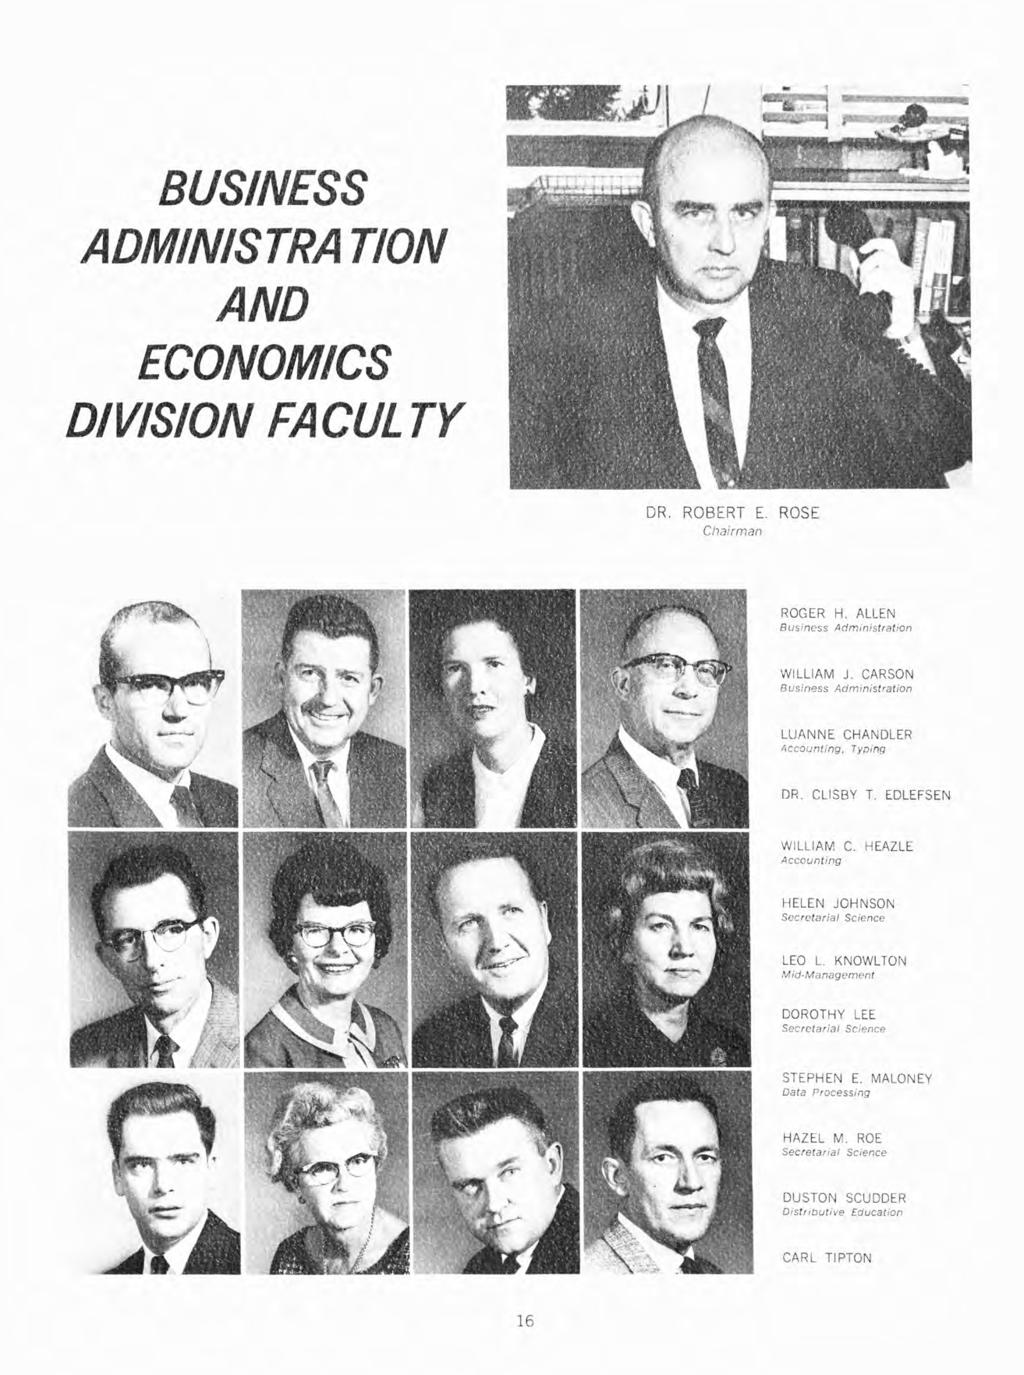 BUSINESS ADMINISTRATION AND ECONOMICS DIVISION FACULTY DR. ROBERT E. ROSE ROGER H. ALLEN Business Administration WILLIAM J. CARSON Business Administration LUANNE CHANDLER Accounting, Typing DR.